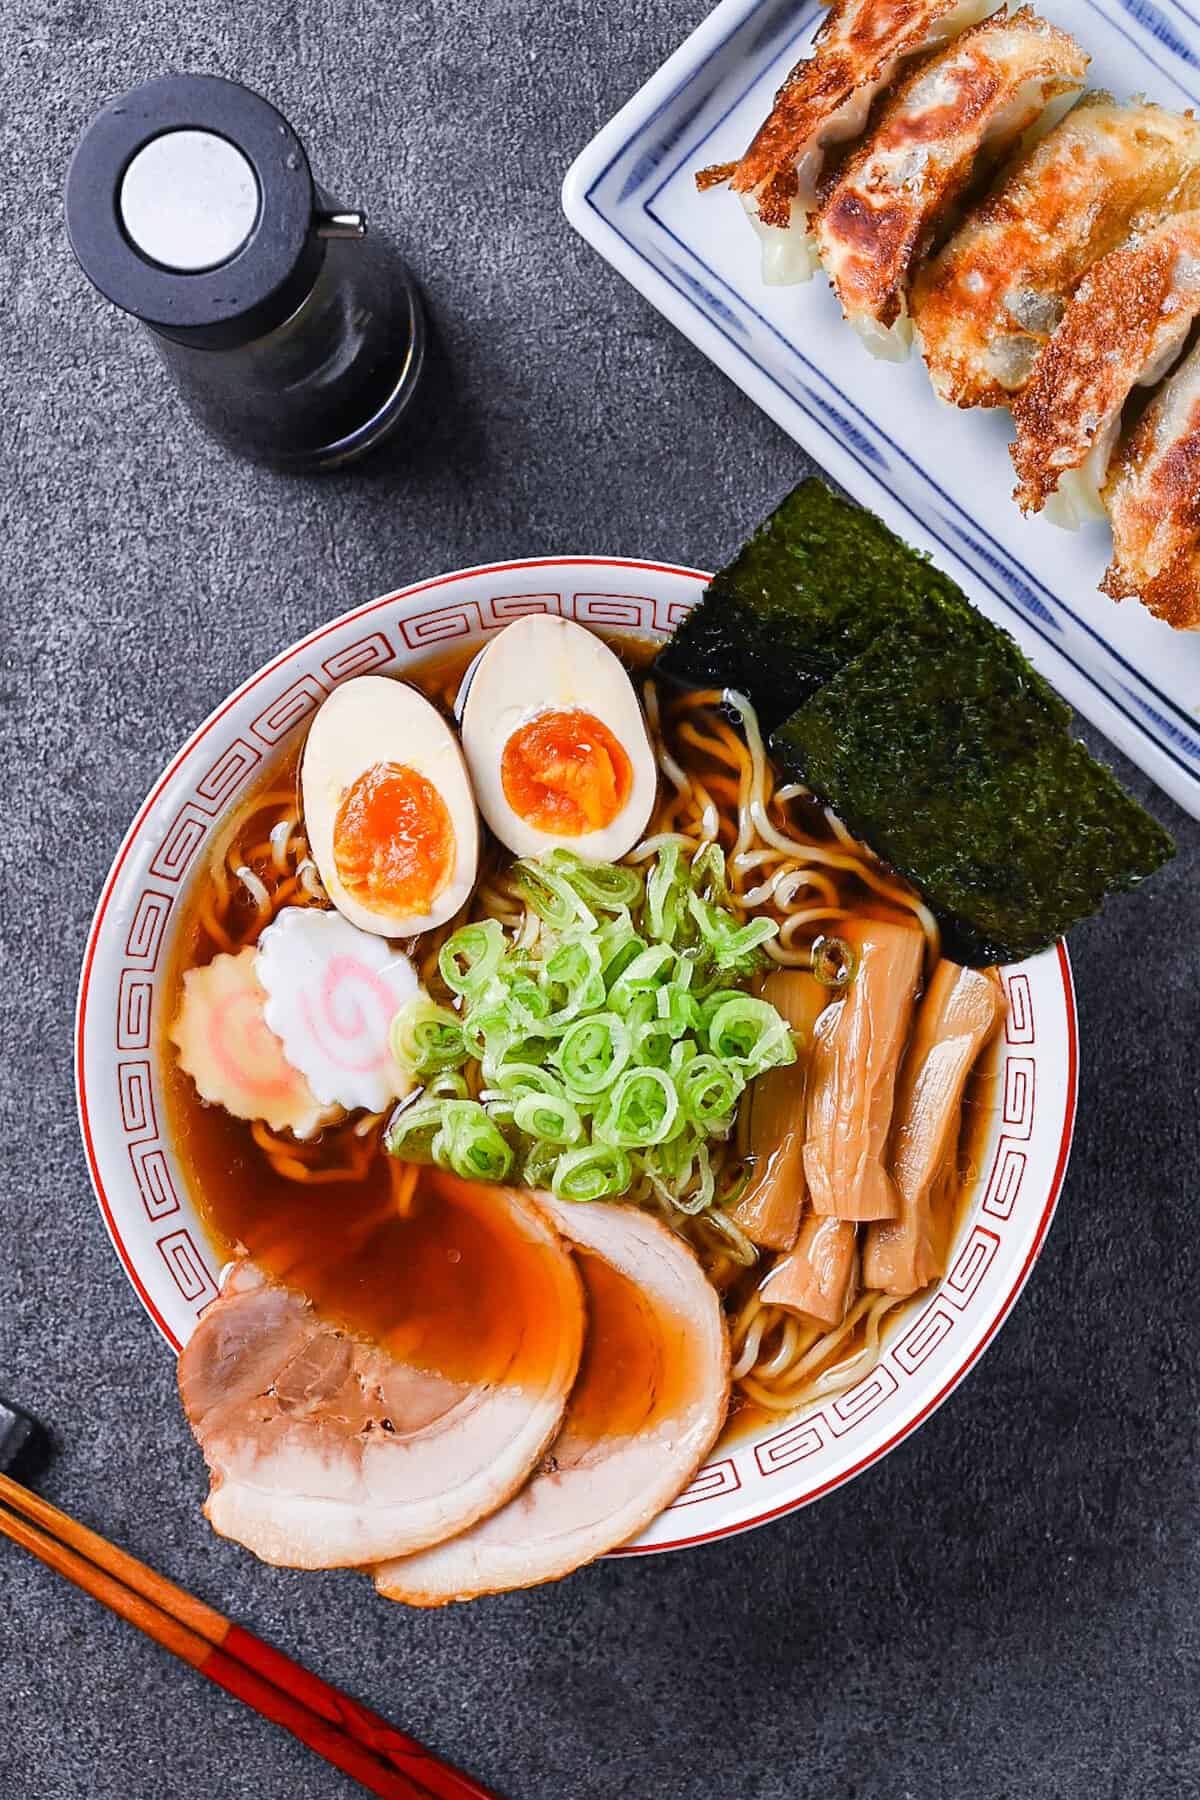 Homemade shoyu ramen topped with ramen egg, menma, narutomaki, chashu, chopped spring onions and nori in a white and red Chinese style noodle bowl